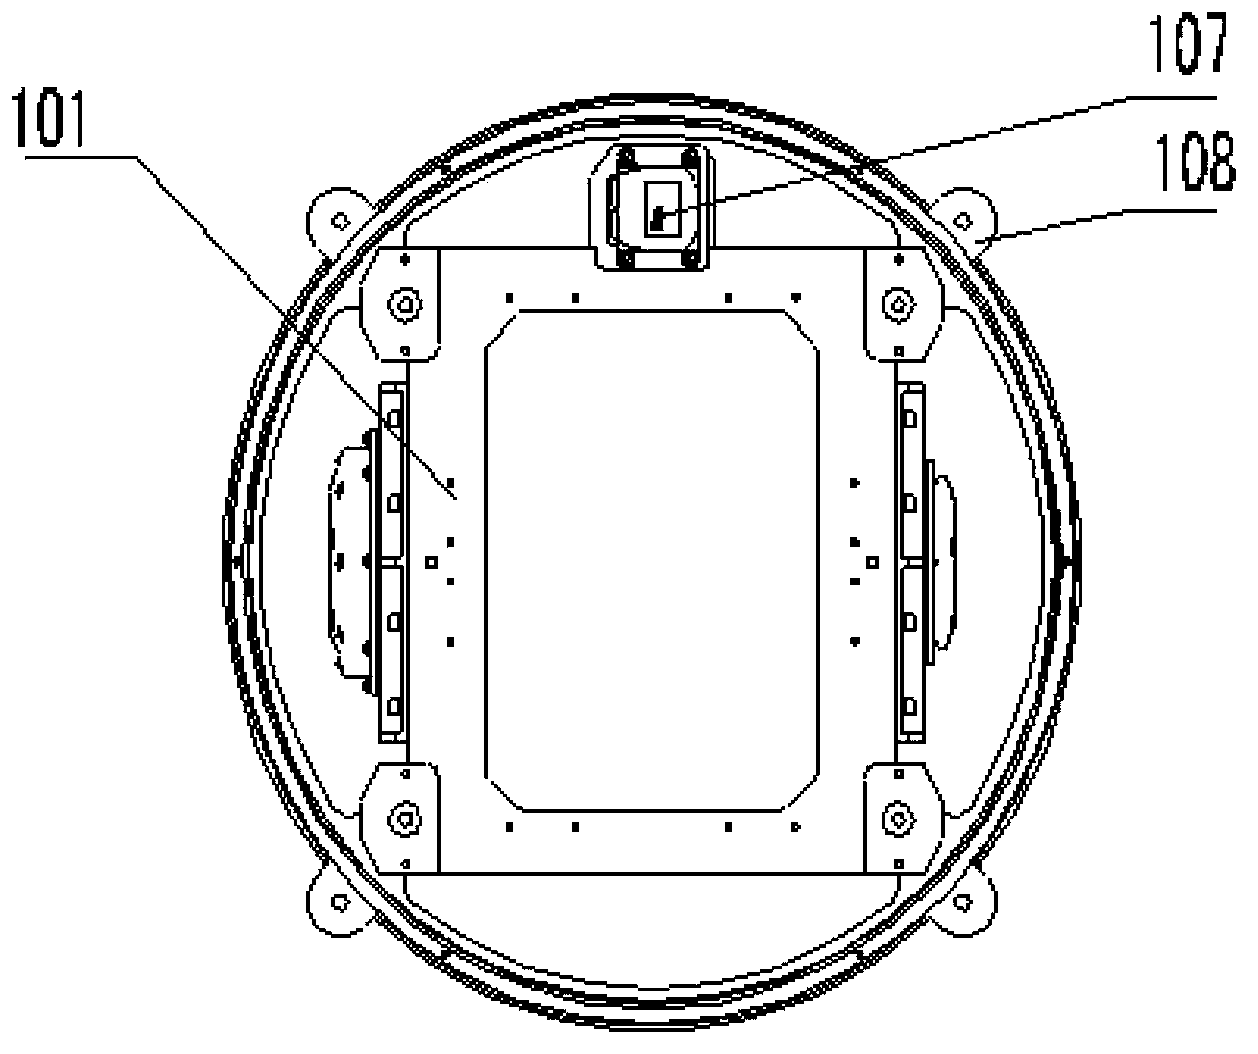 Triaxial orthographic nacelle of unmanned aerial vehicle